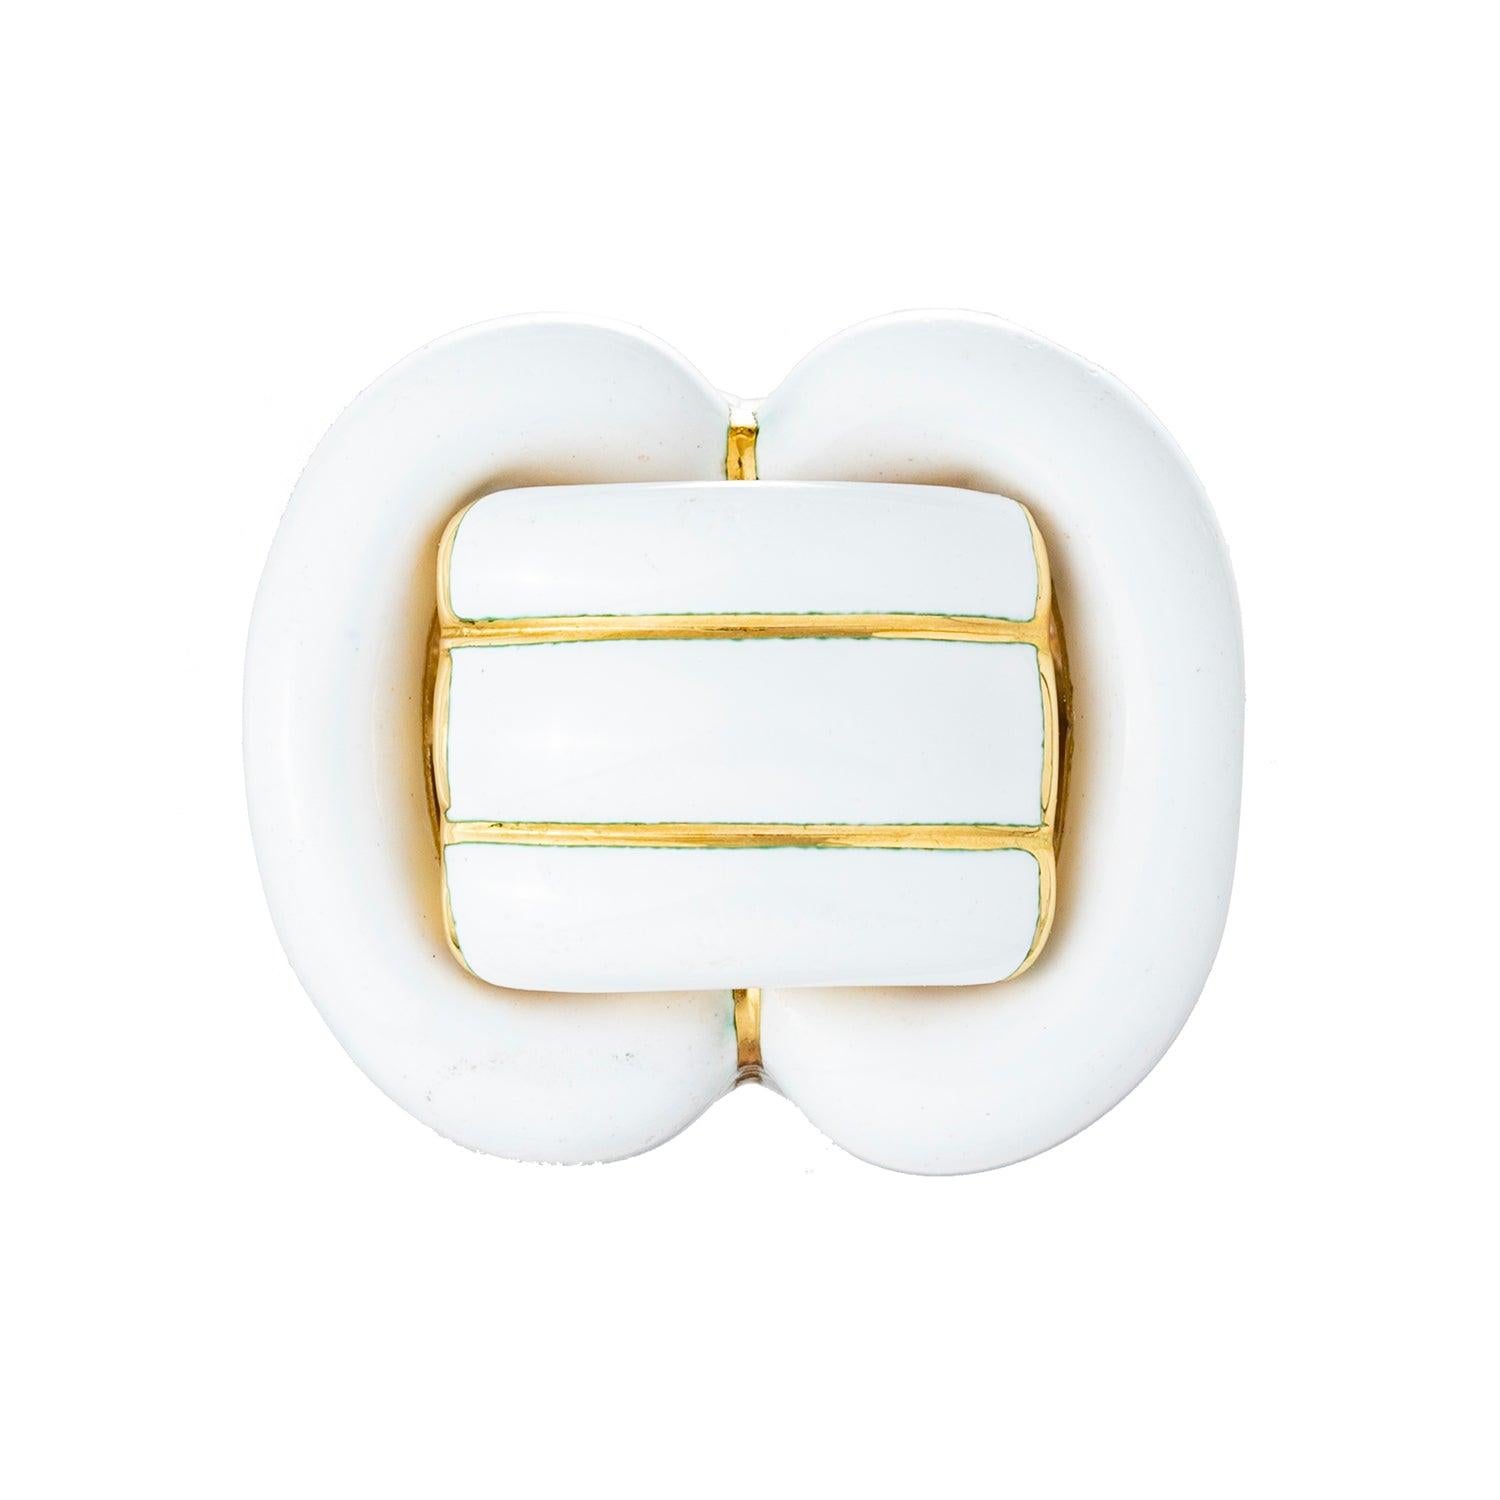 David Webb buckle motif cocktail ring, in 18k yellow gold decorated with white enamel sections.  Signed 